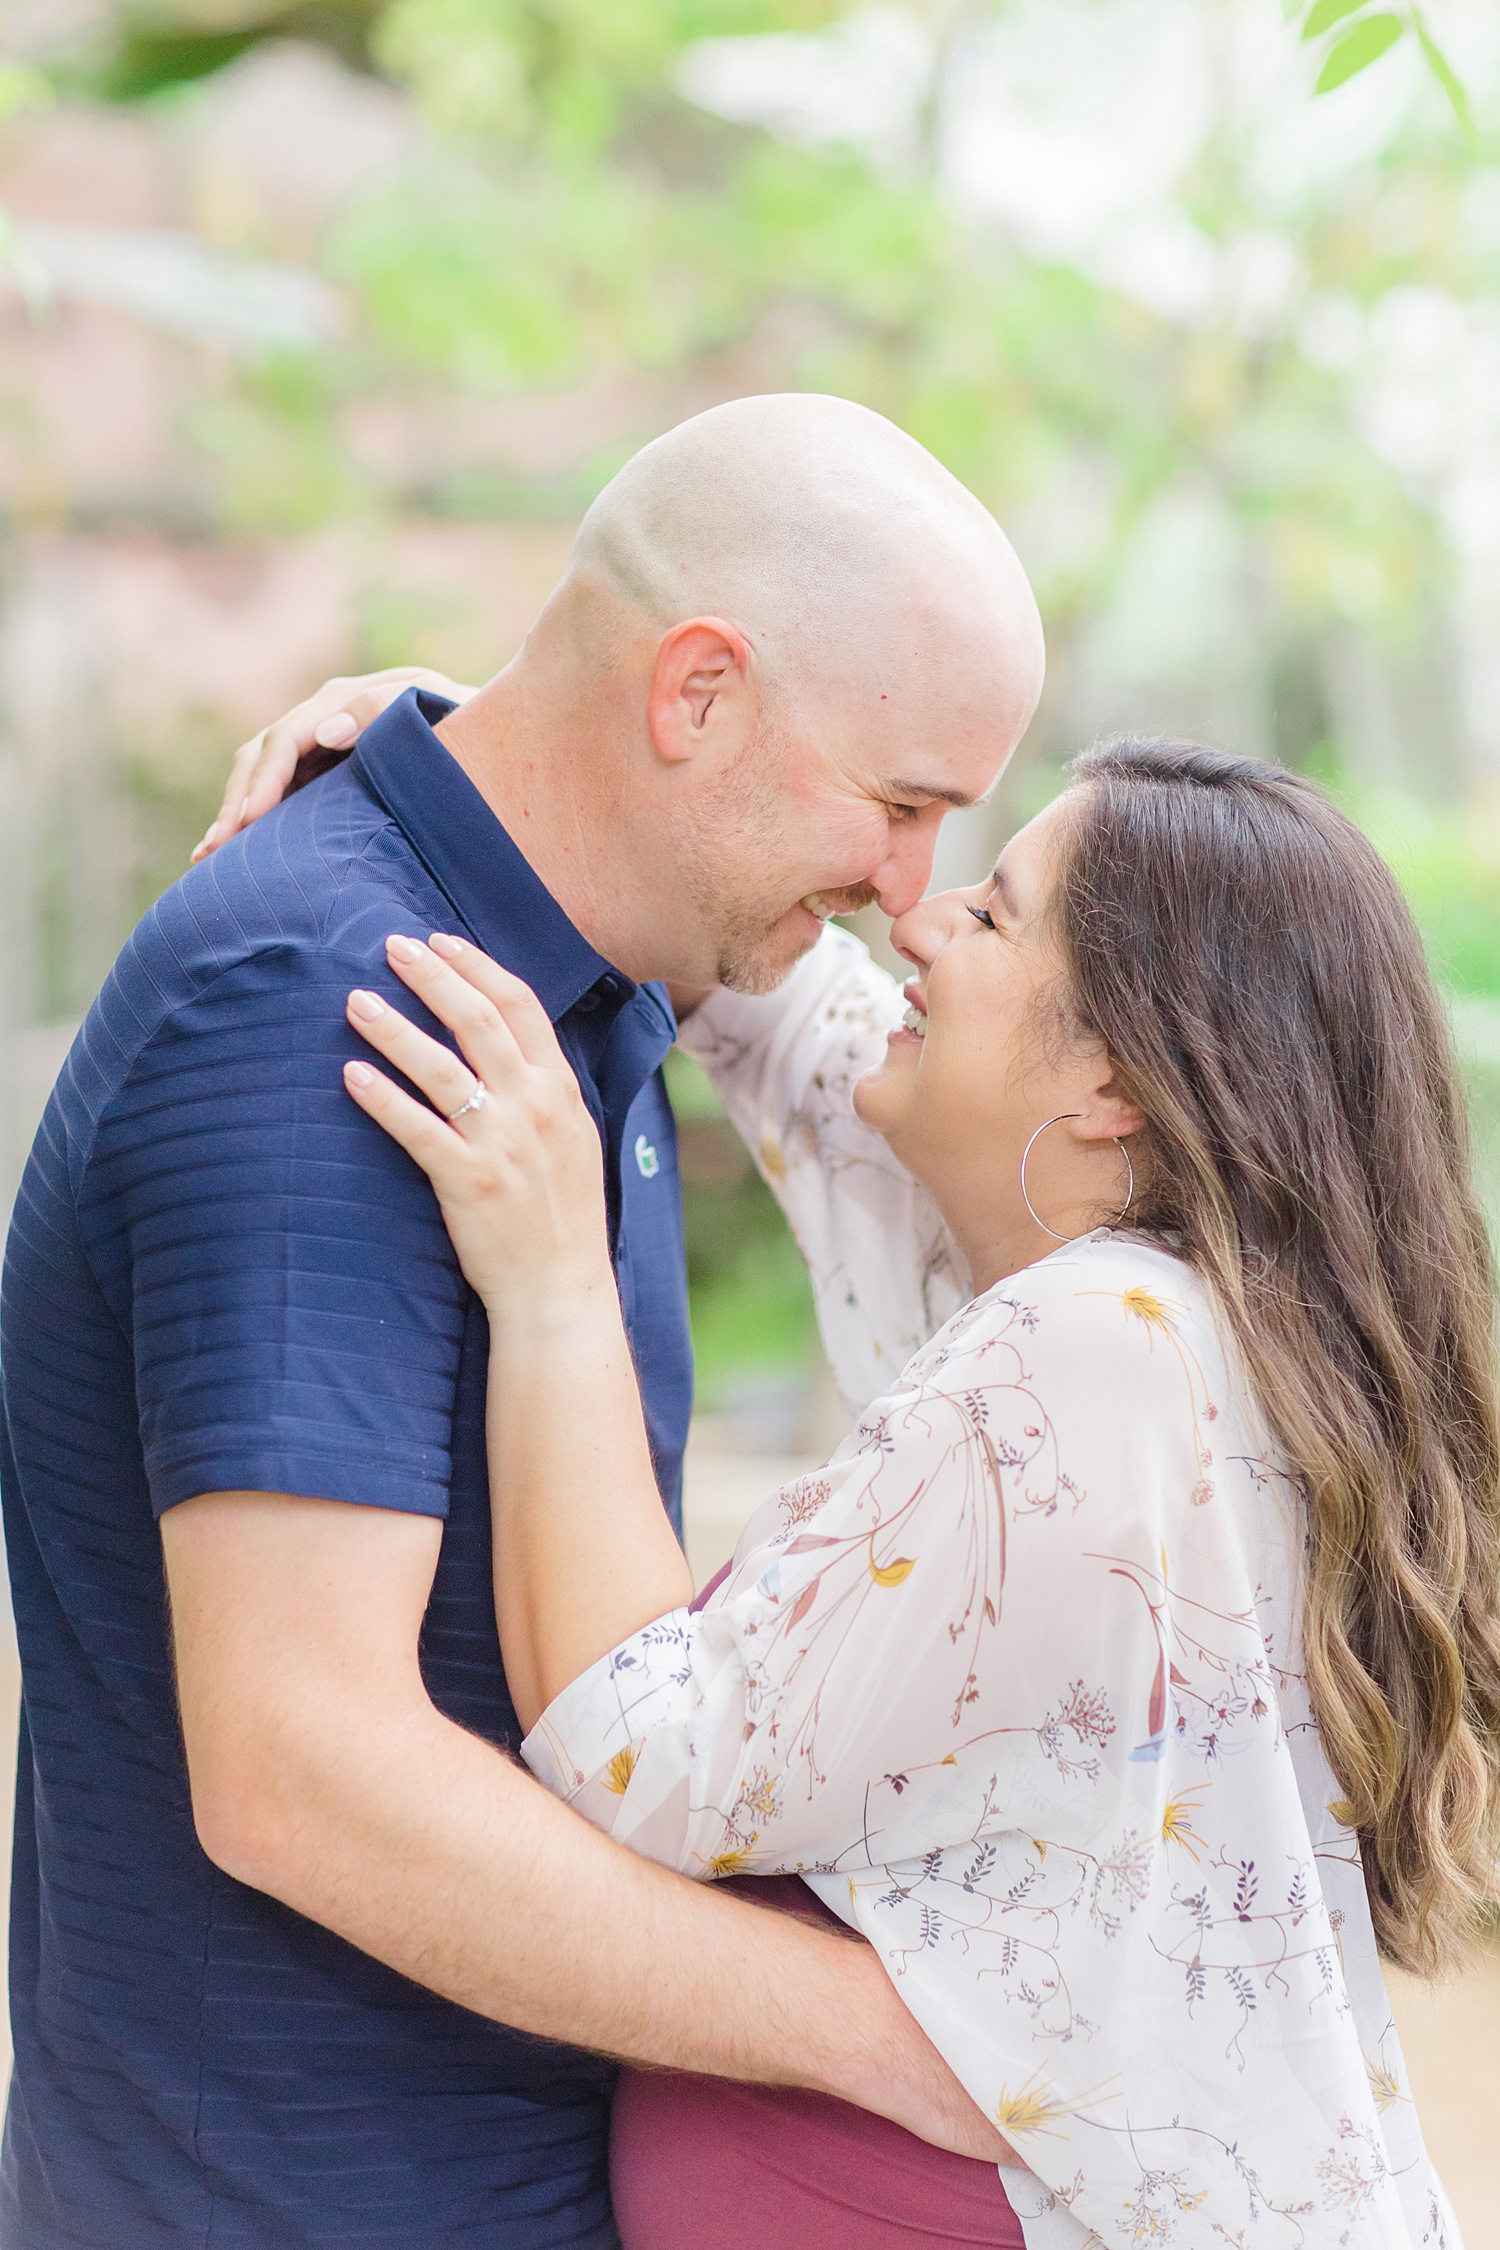 Couple lean in together during their engagement session